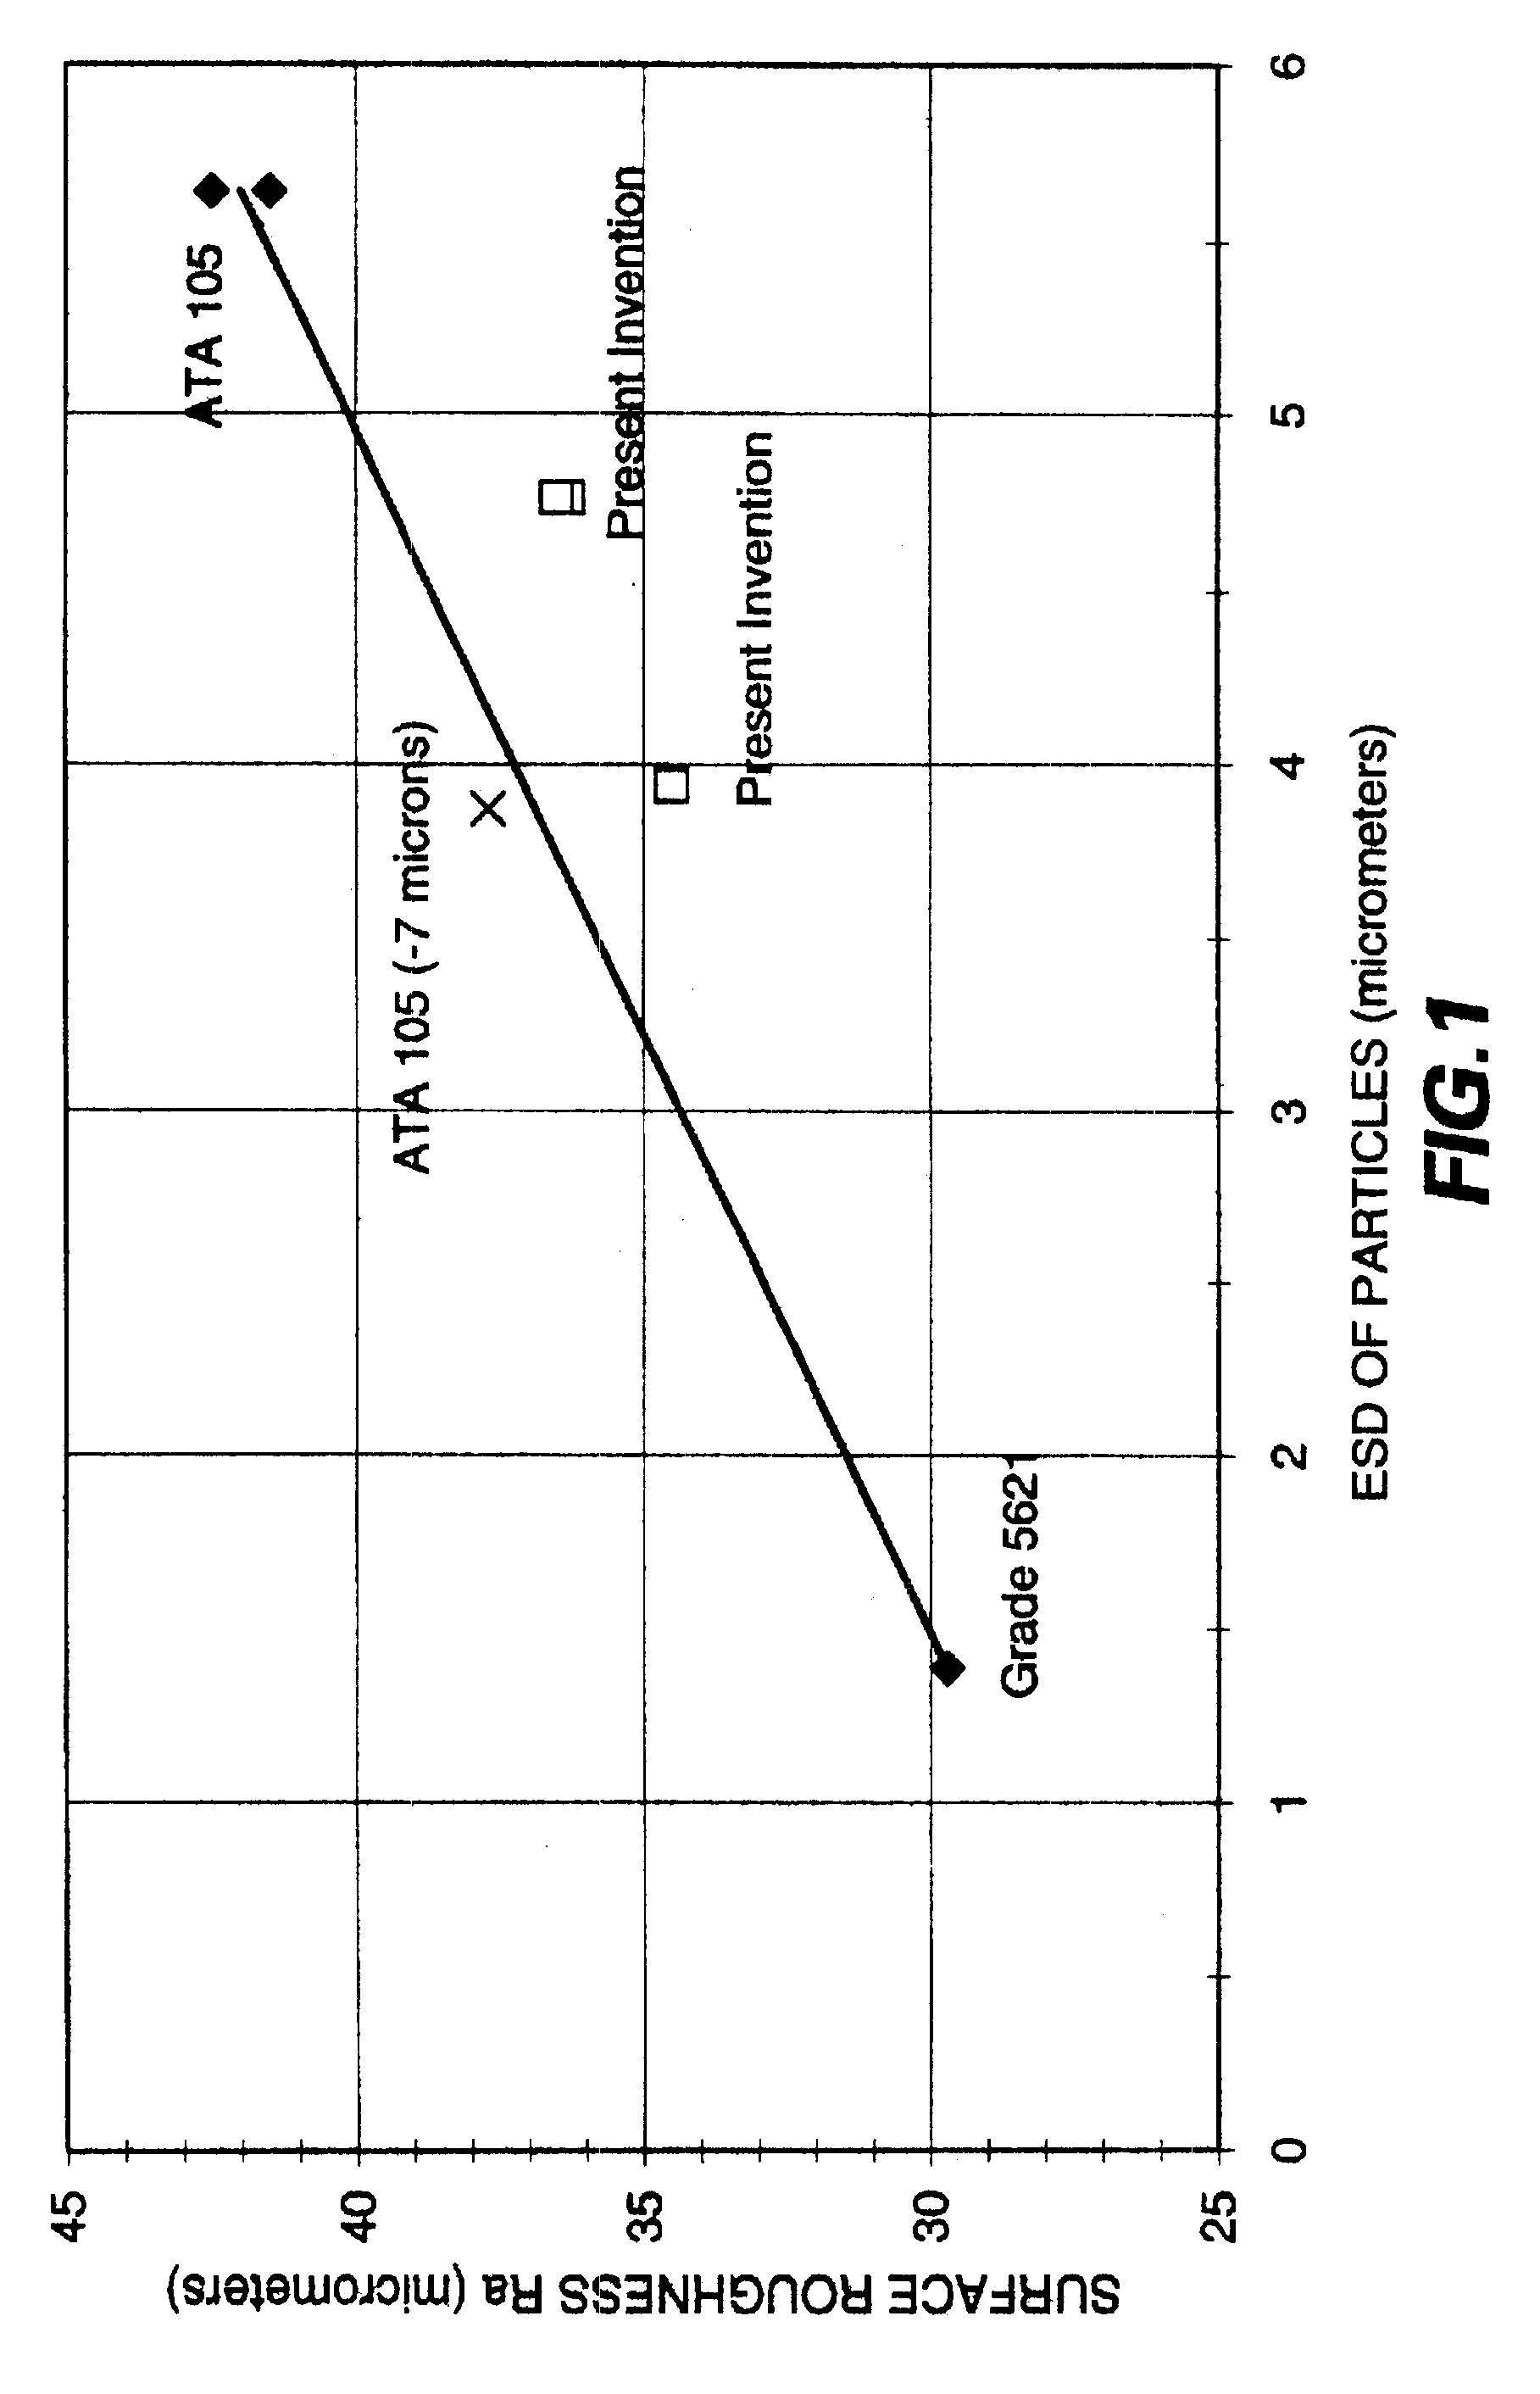 Compositions and methods for producing coatings with improved surface smoothness and articles having such coatings